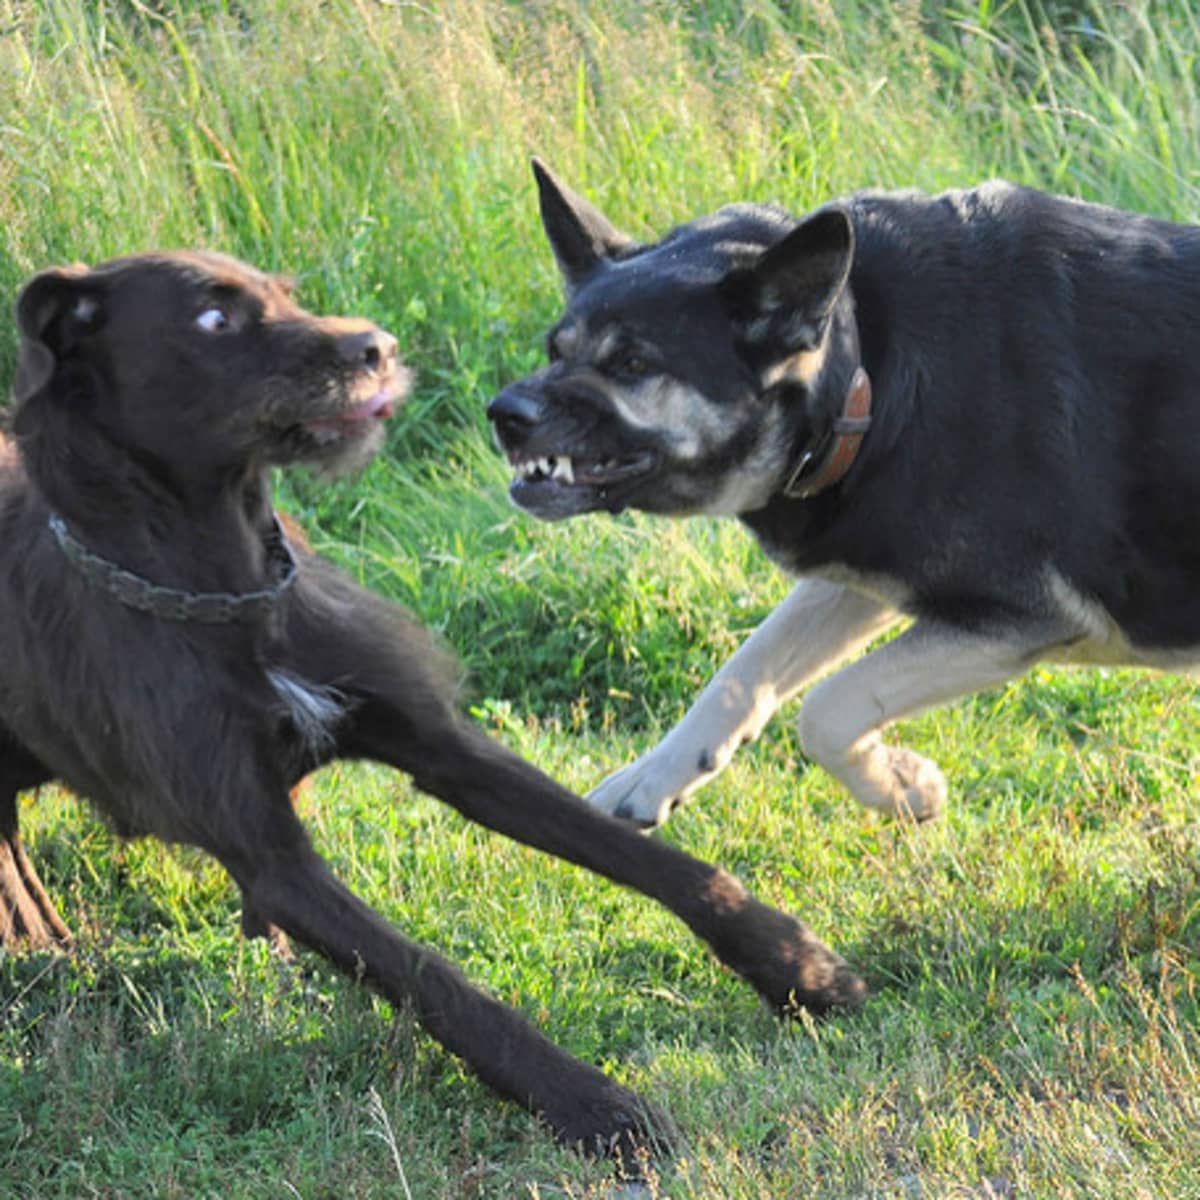 How To Protect Your Dog From Being Attacked: 4 Strategies - Pethelpful